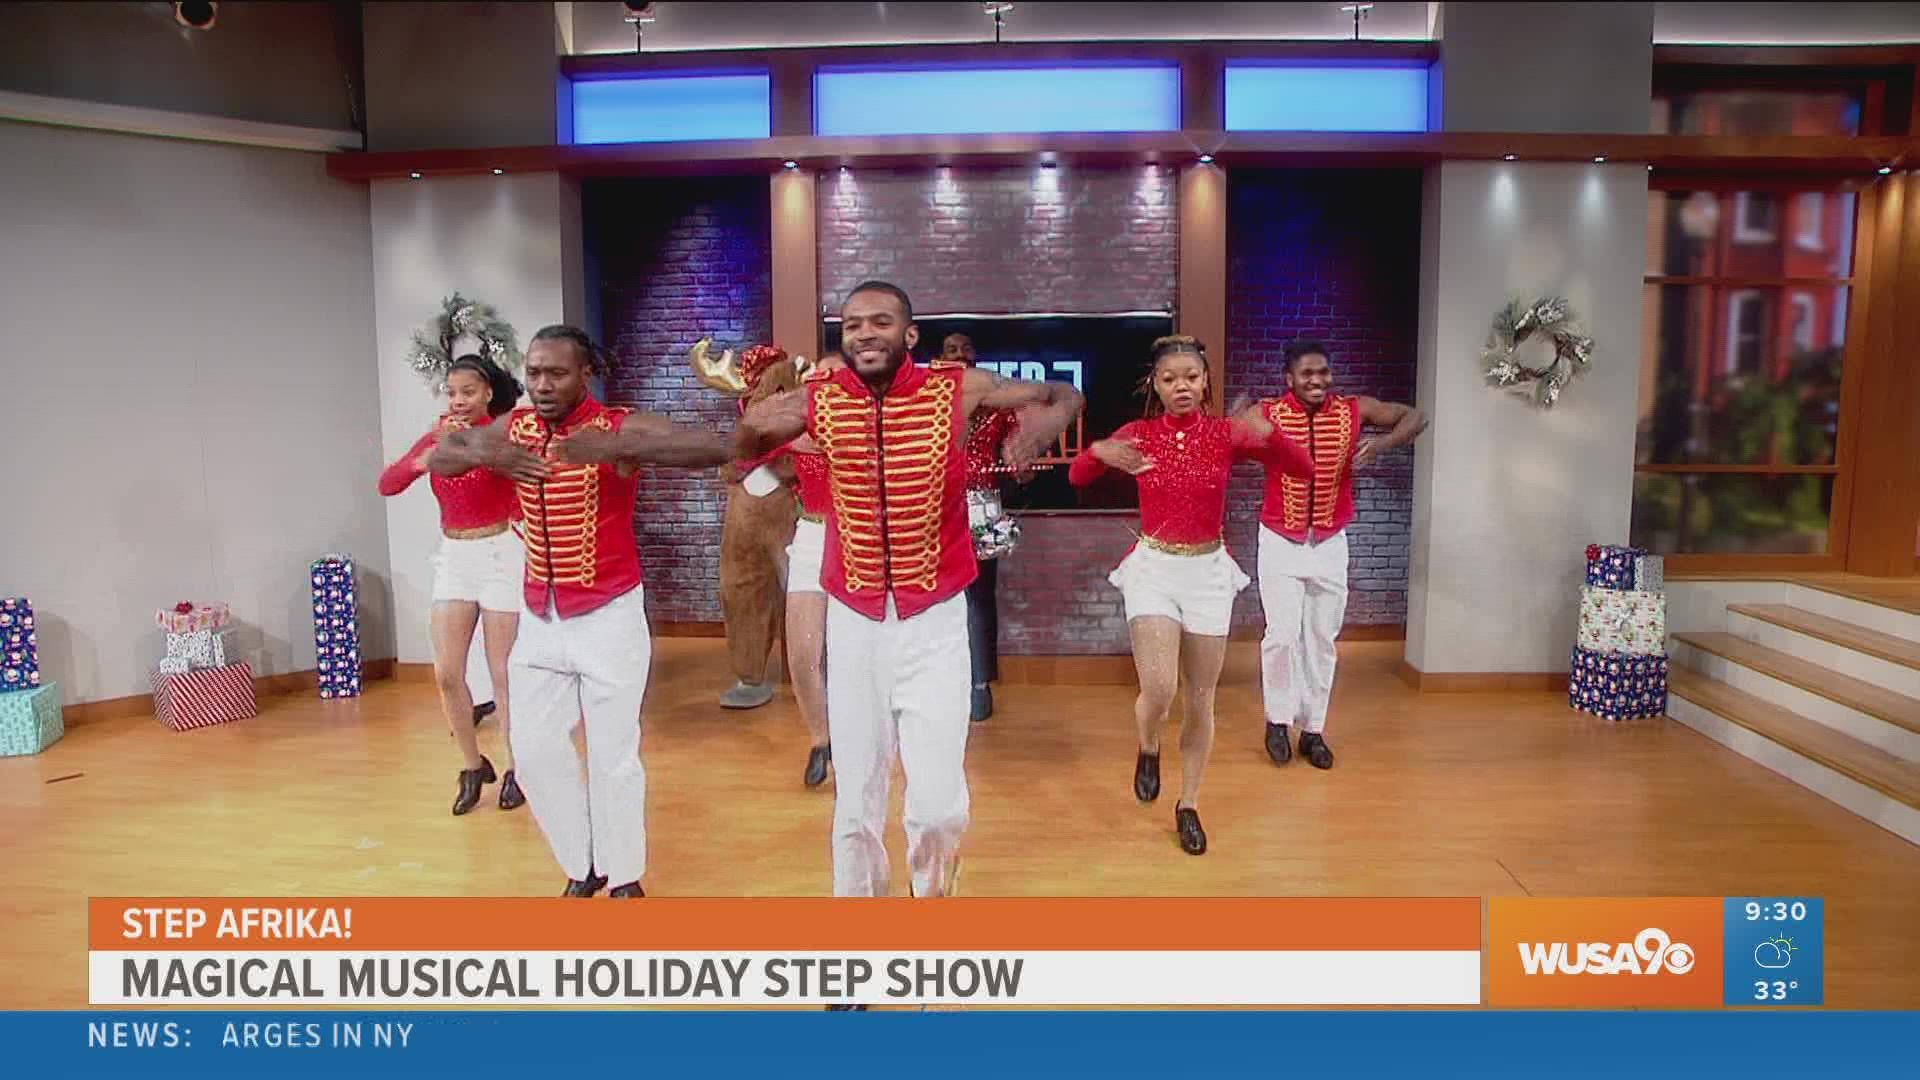 Step Afrika!'s Magical Musical Holiday Step Show is a unique, music-filled holiday event for the entire family!